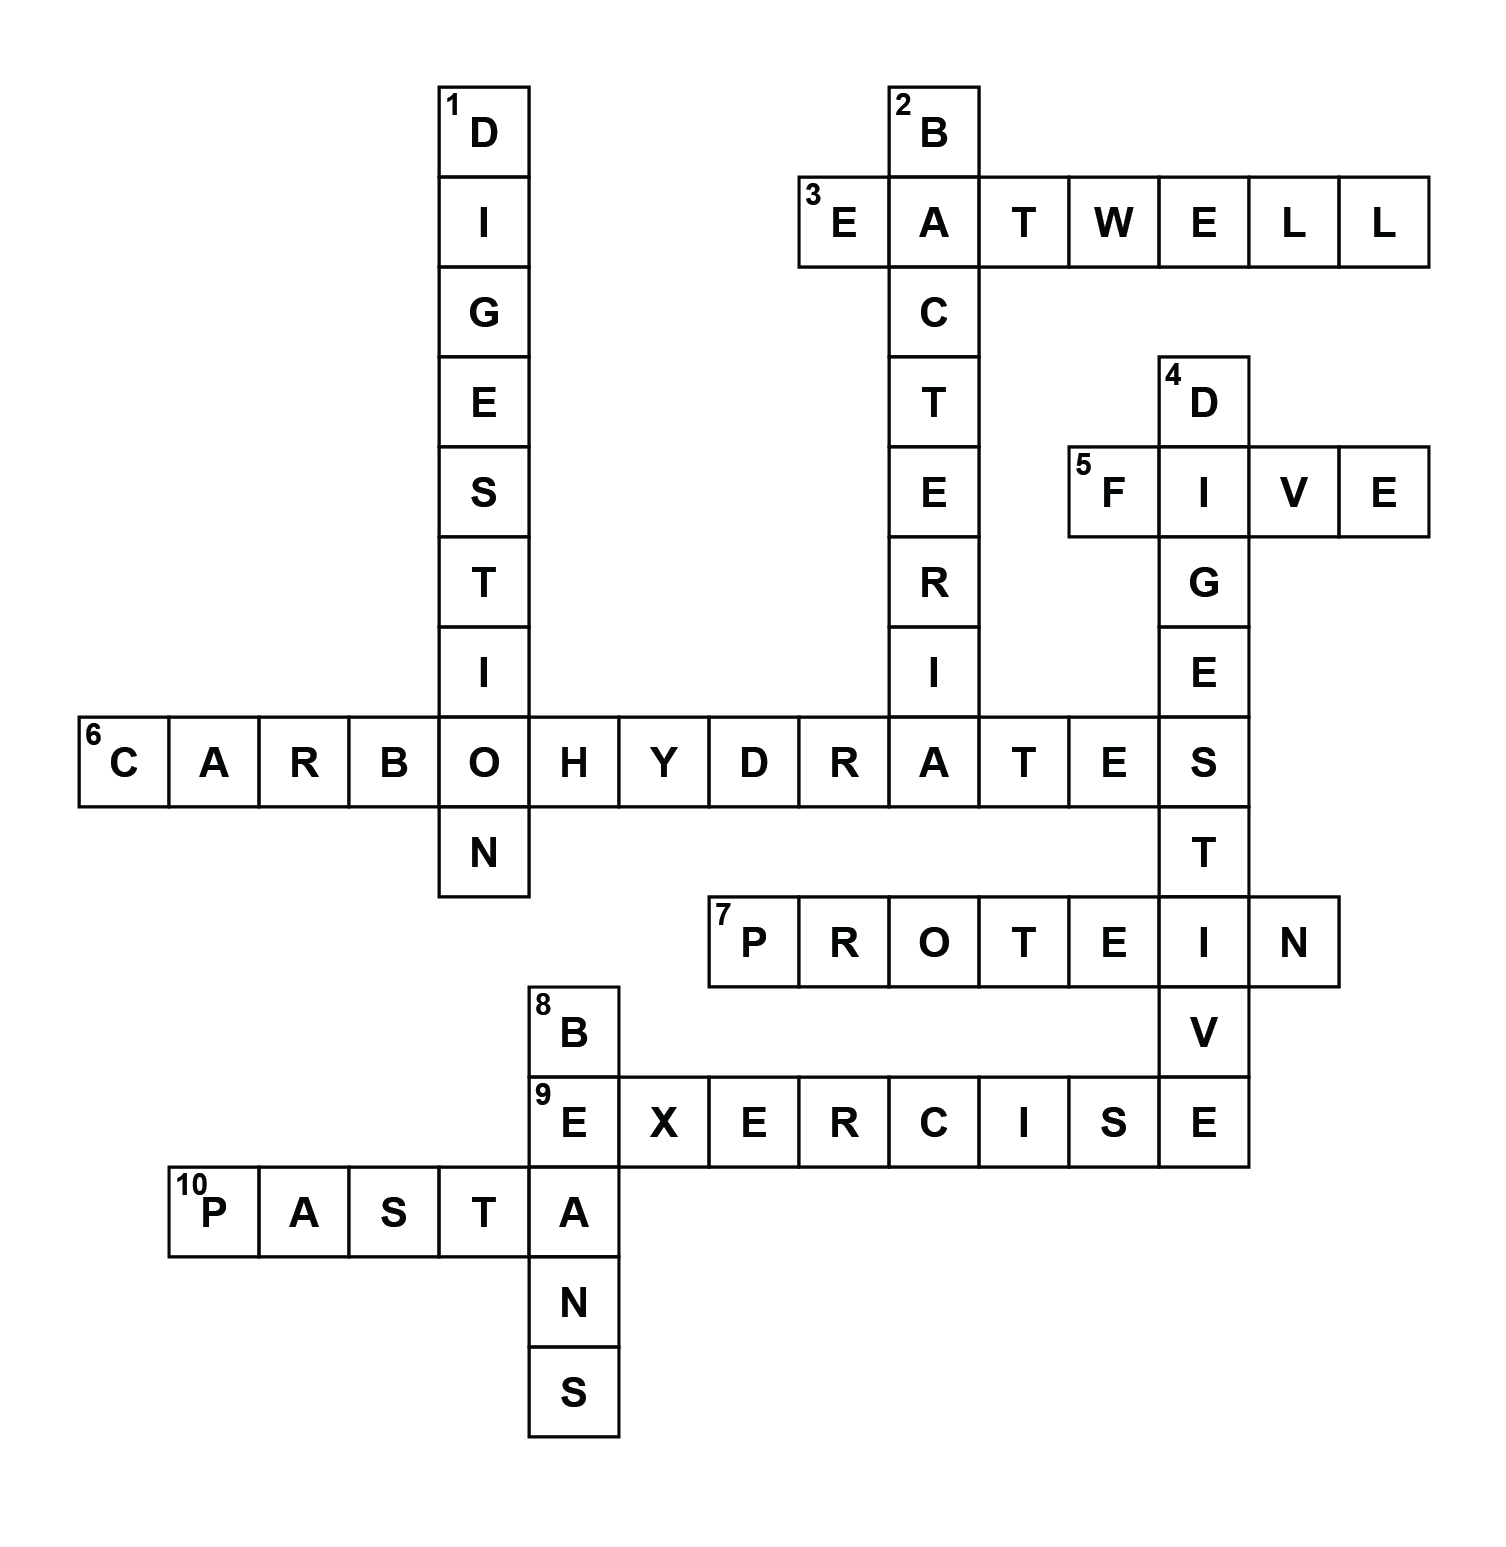 Solution for Issue #1 Crossword Puzzle